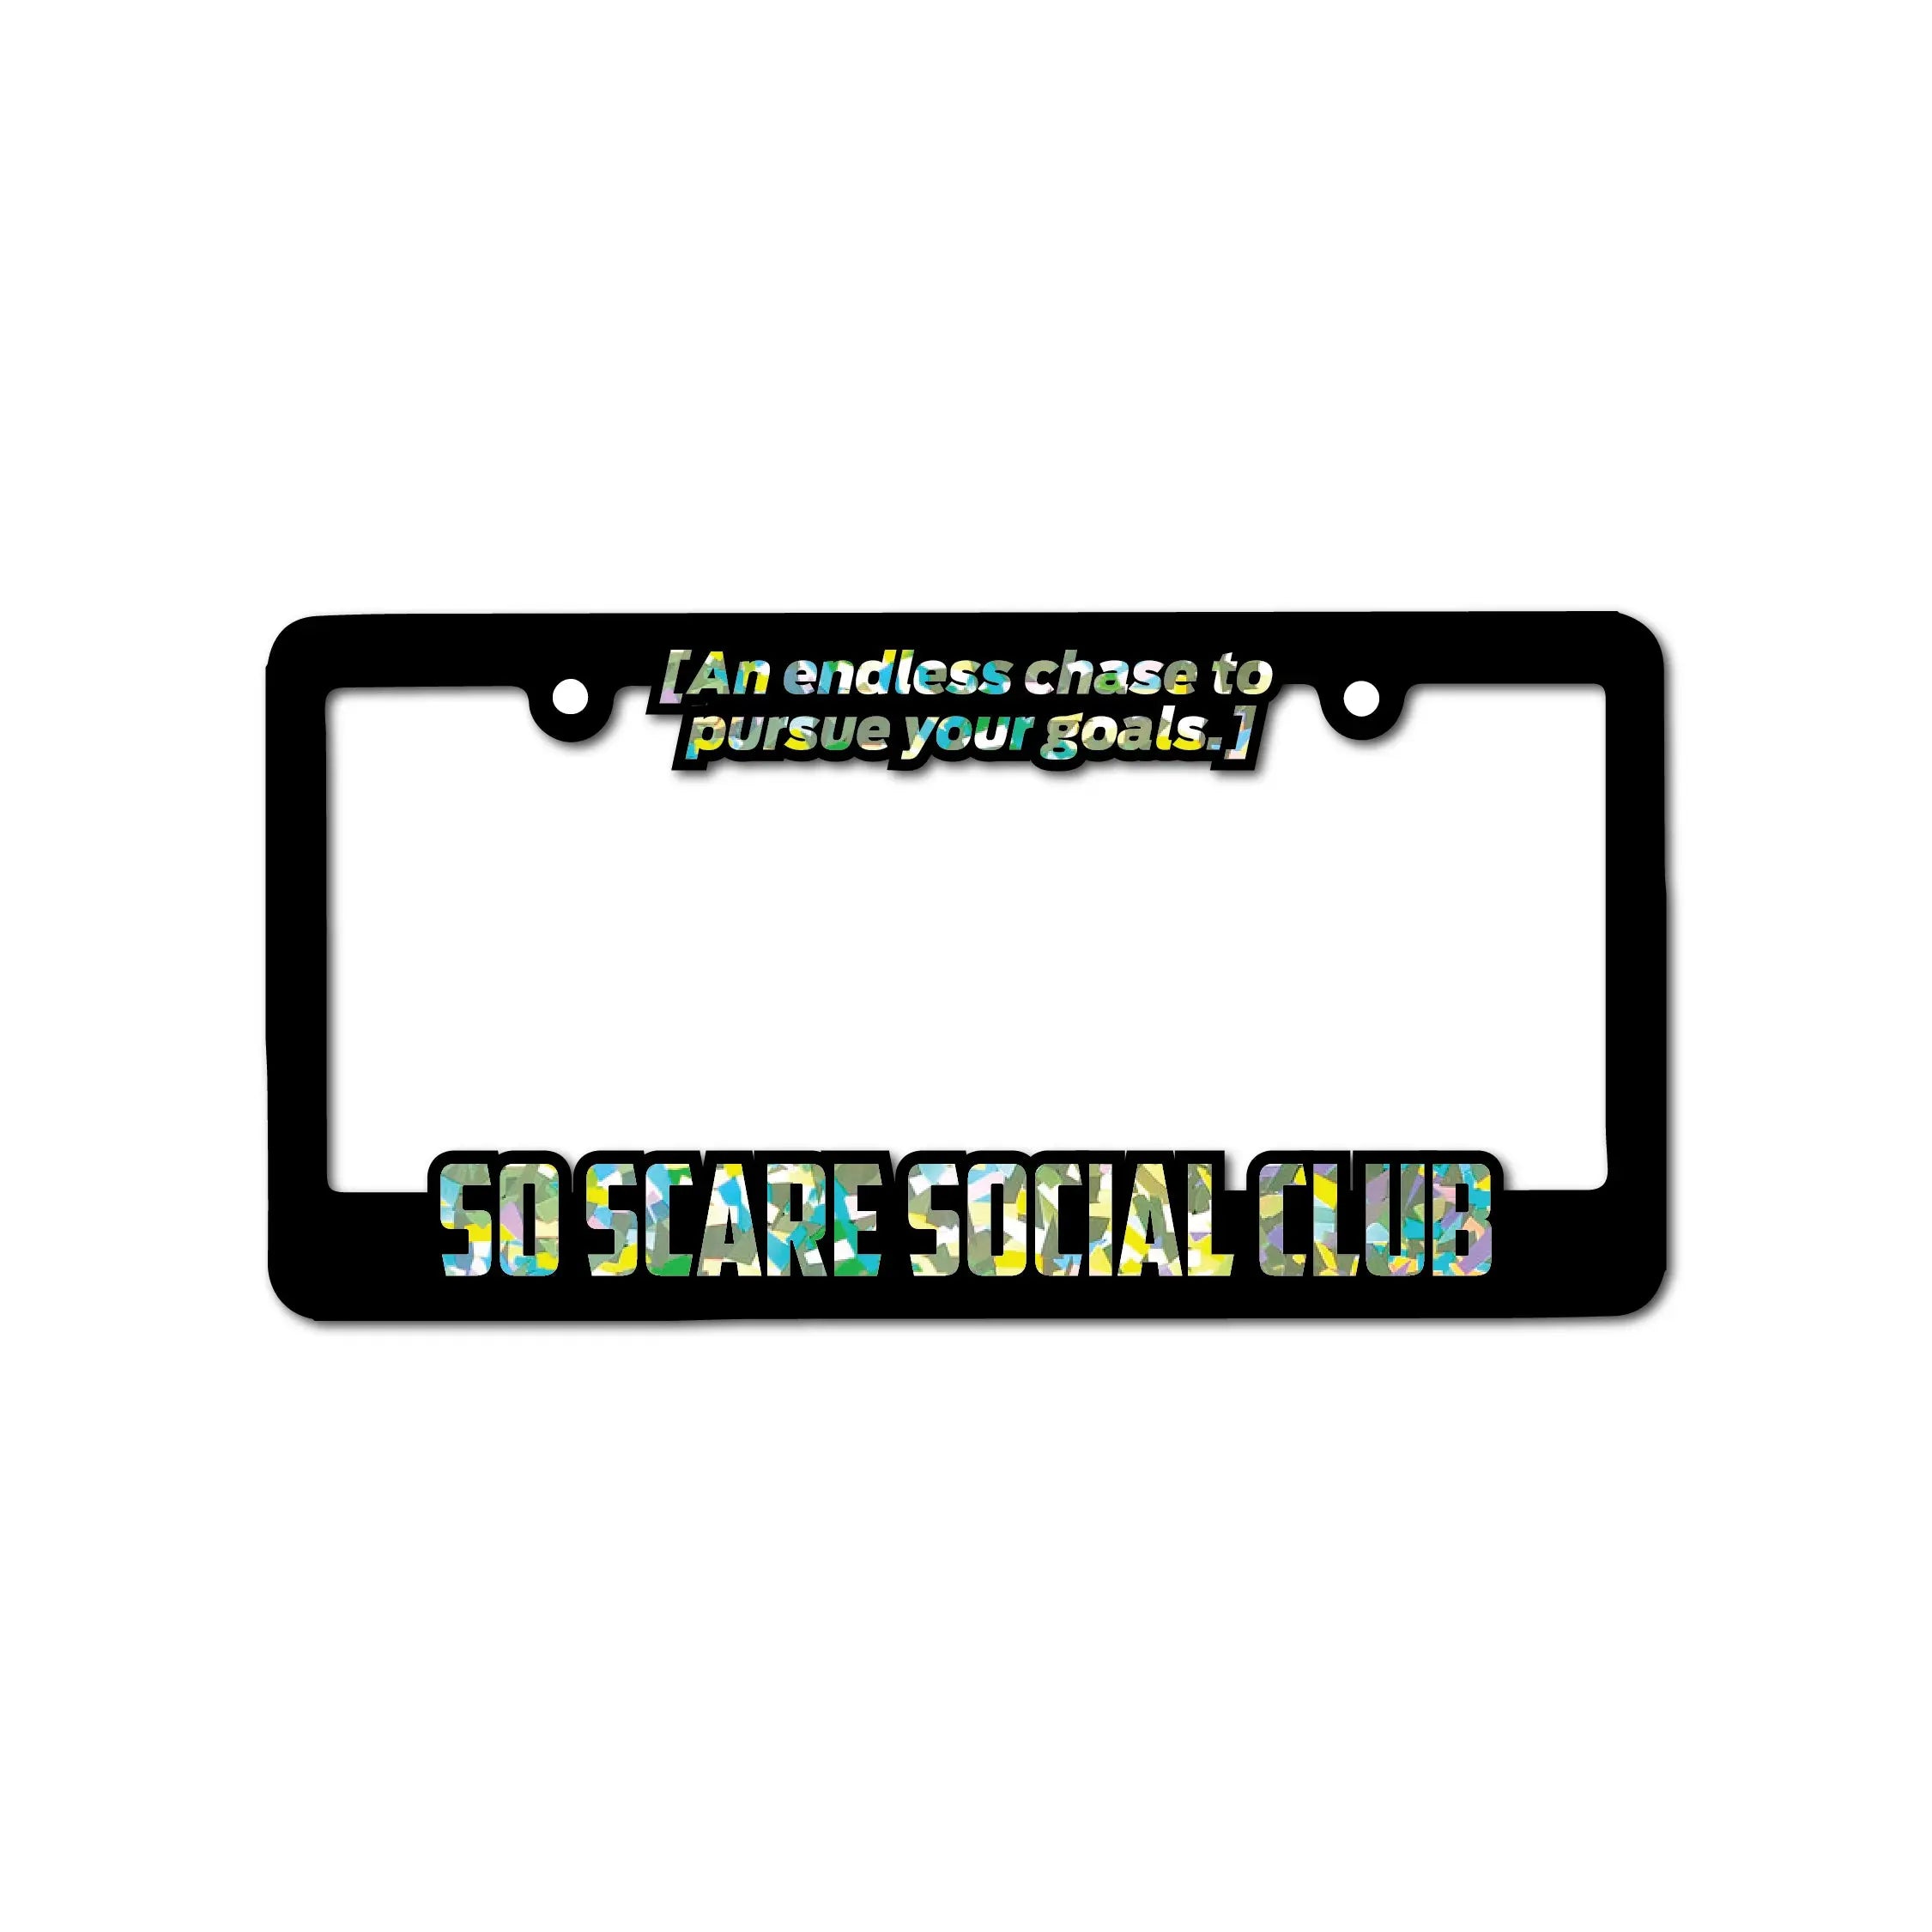 SO SCARE LICENSE PLATE FRAME - CRYSTAL SHATTER SO SCARE SOCIAL CLUB